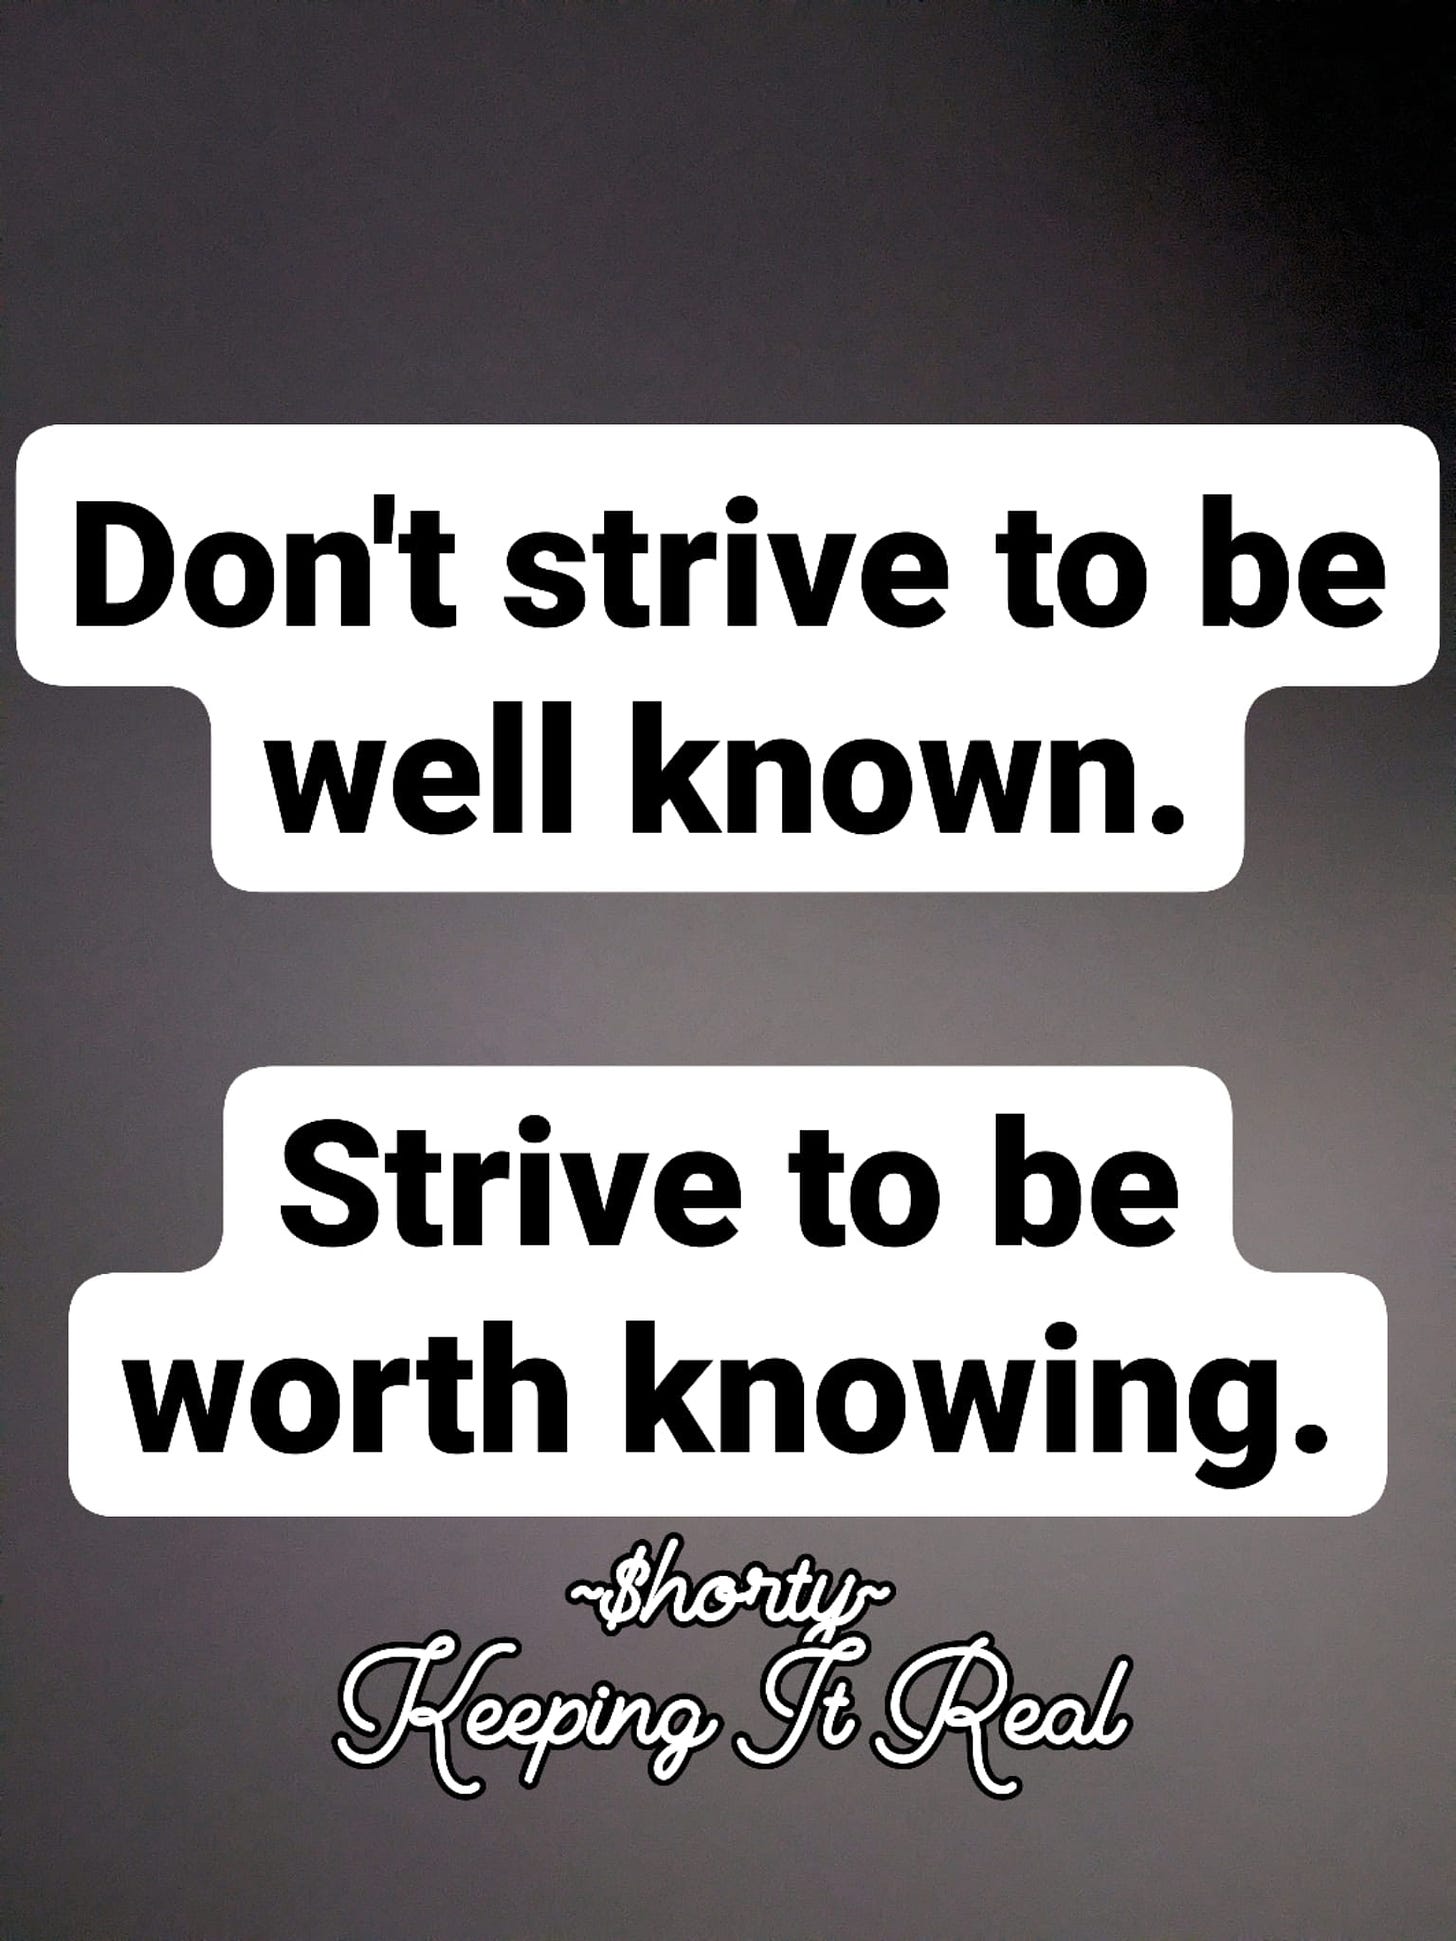 May be an image of text that says 'Don't strive to be well known. Strive to be worth knowing. ~$horty Heeping It Real'